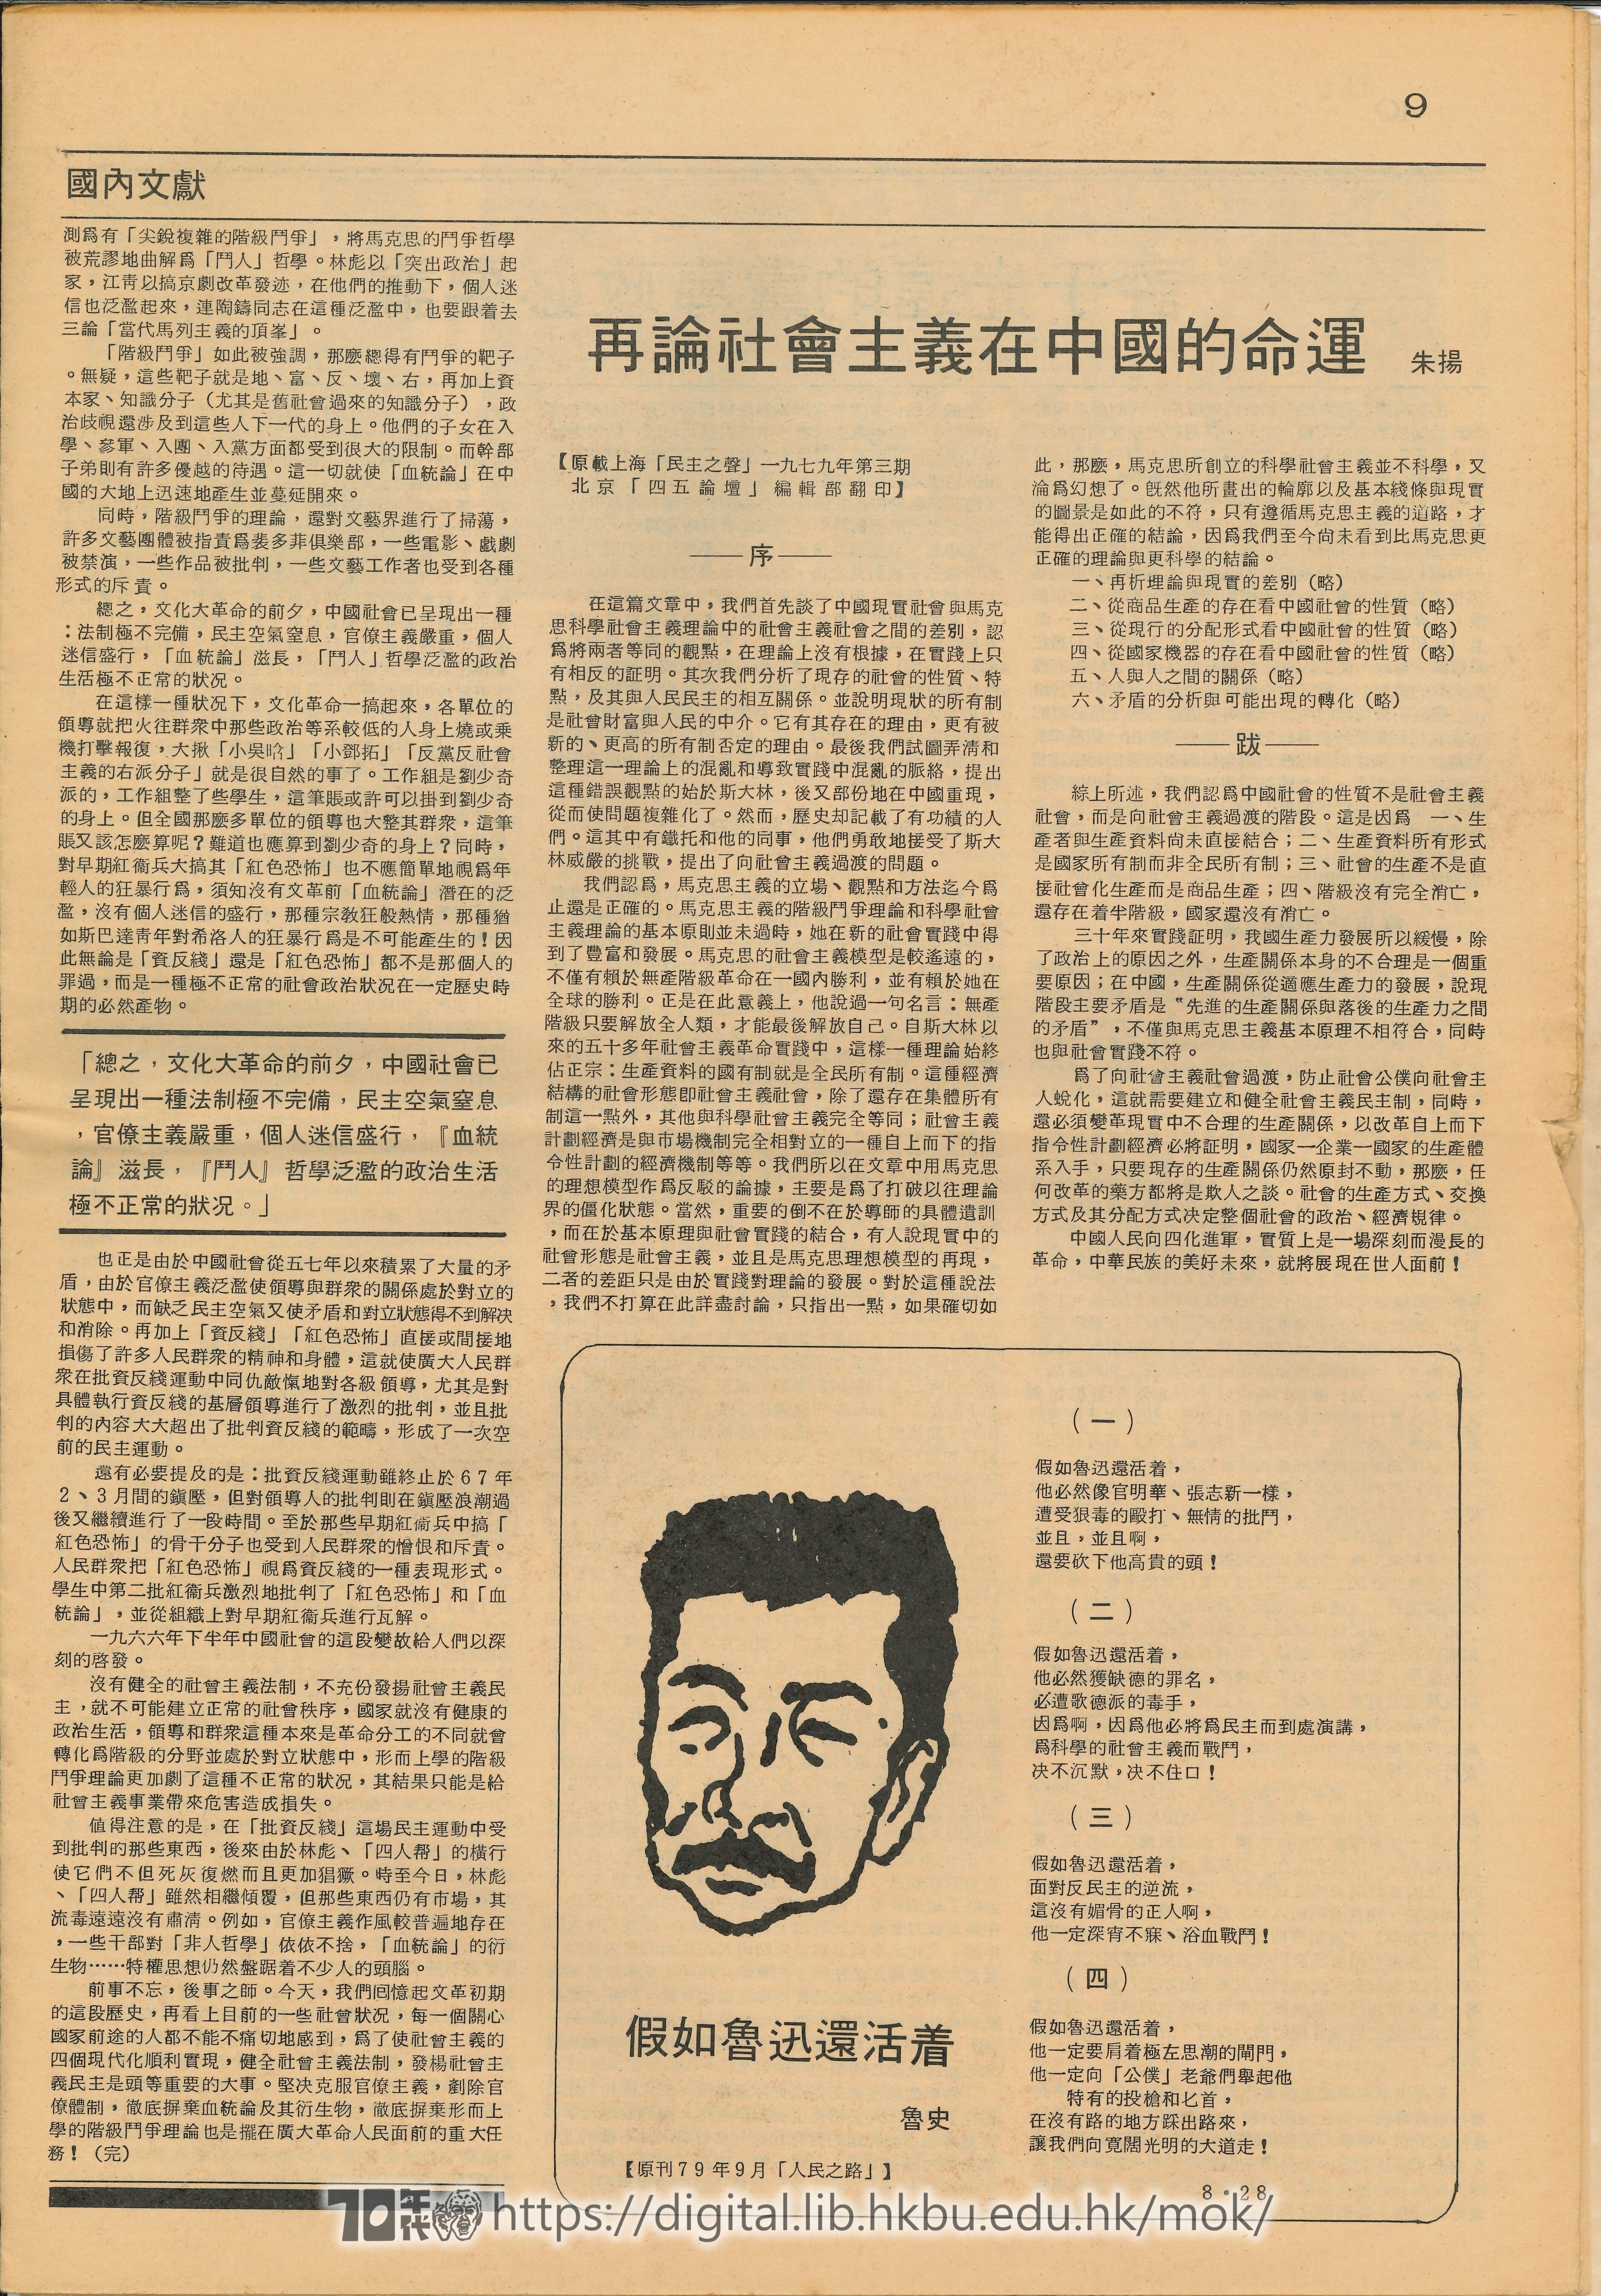  7 Genuine mass campaign during Cultural Revolution  